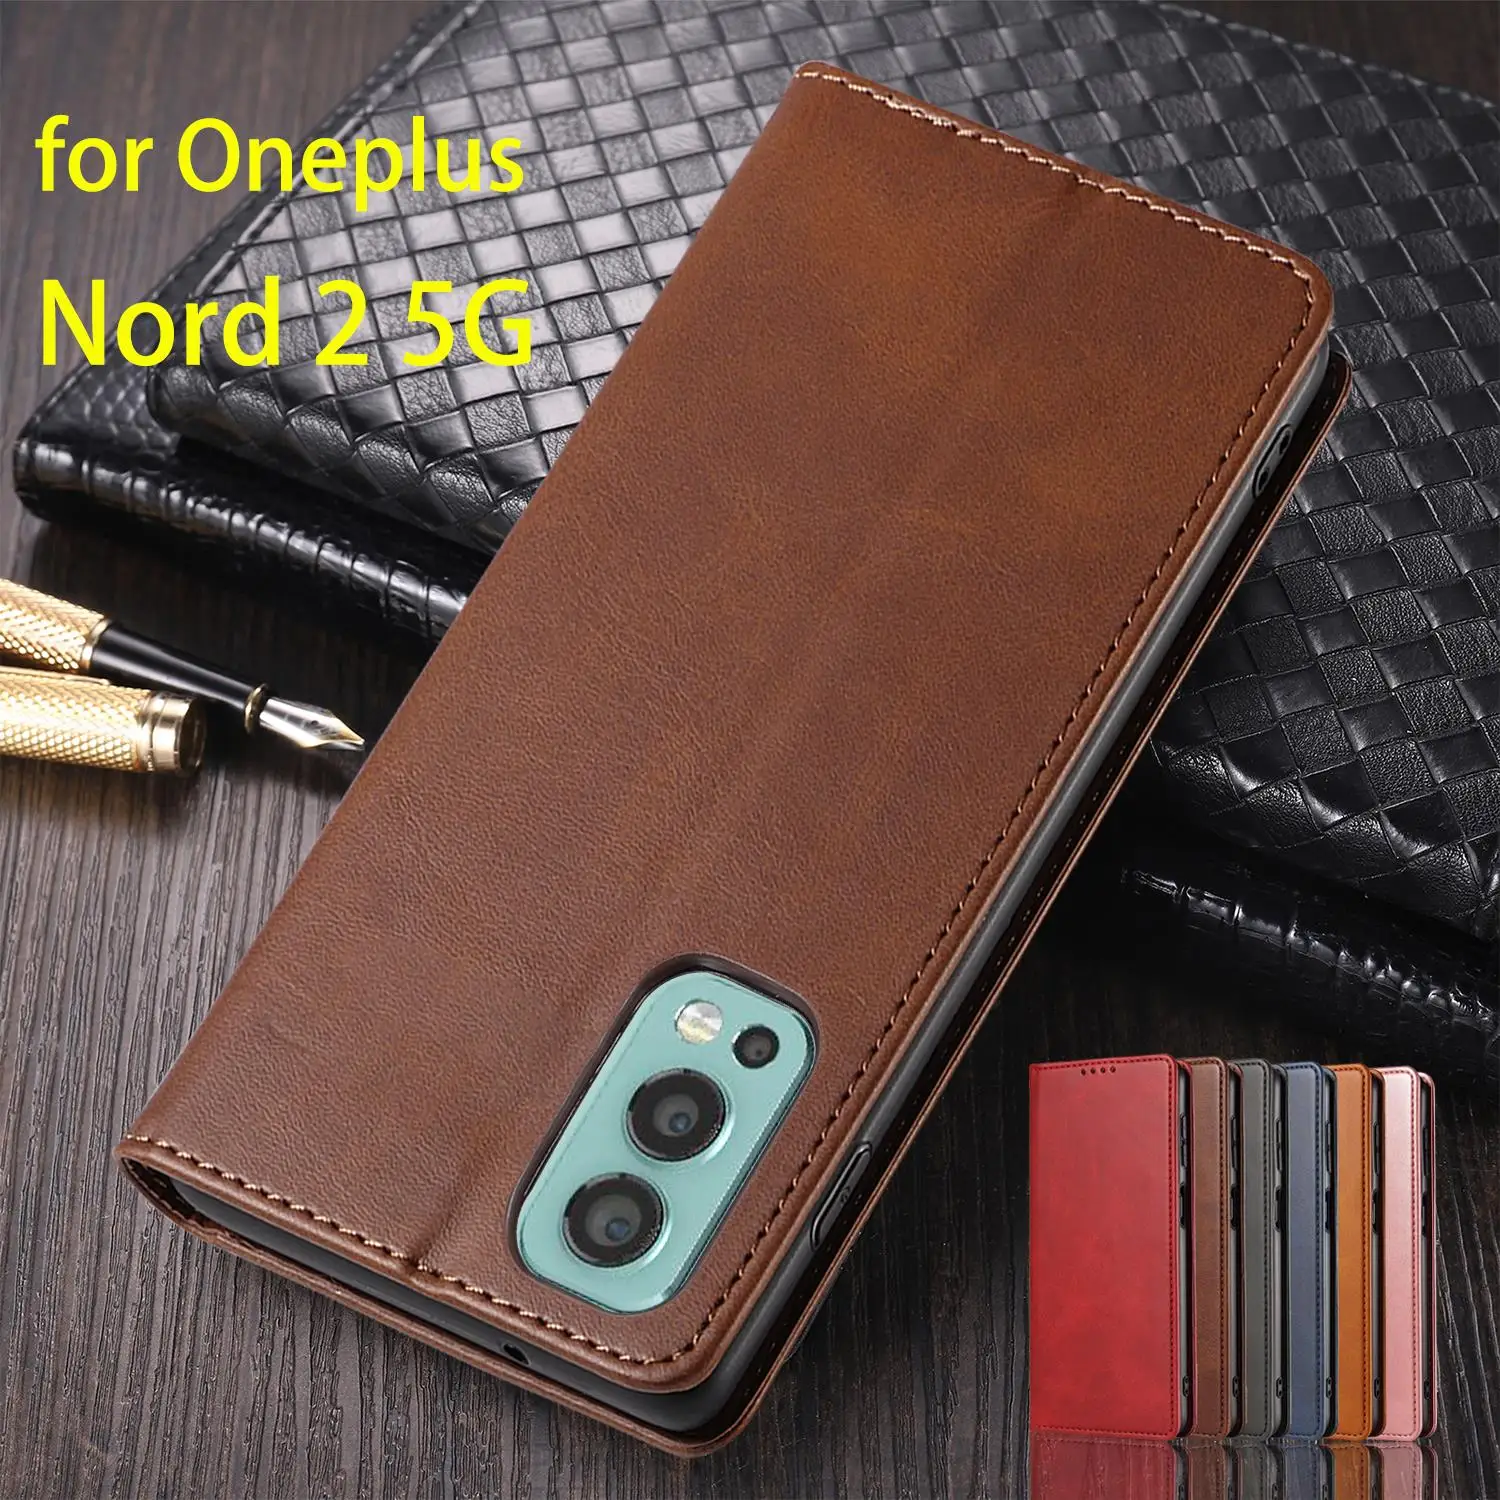 

Magnetic Attraction Cover Leather Case for Oneplus Nord 2 5G / 1+ Nord2 5G Flip Case Holster Wallet Case Business Fundas Coque